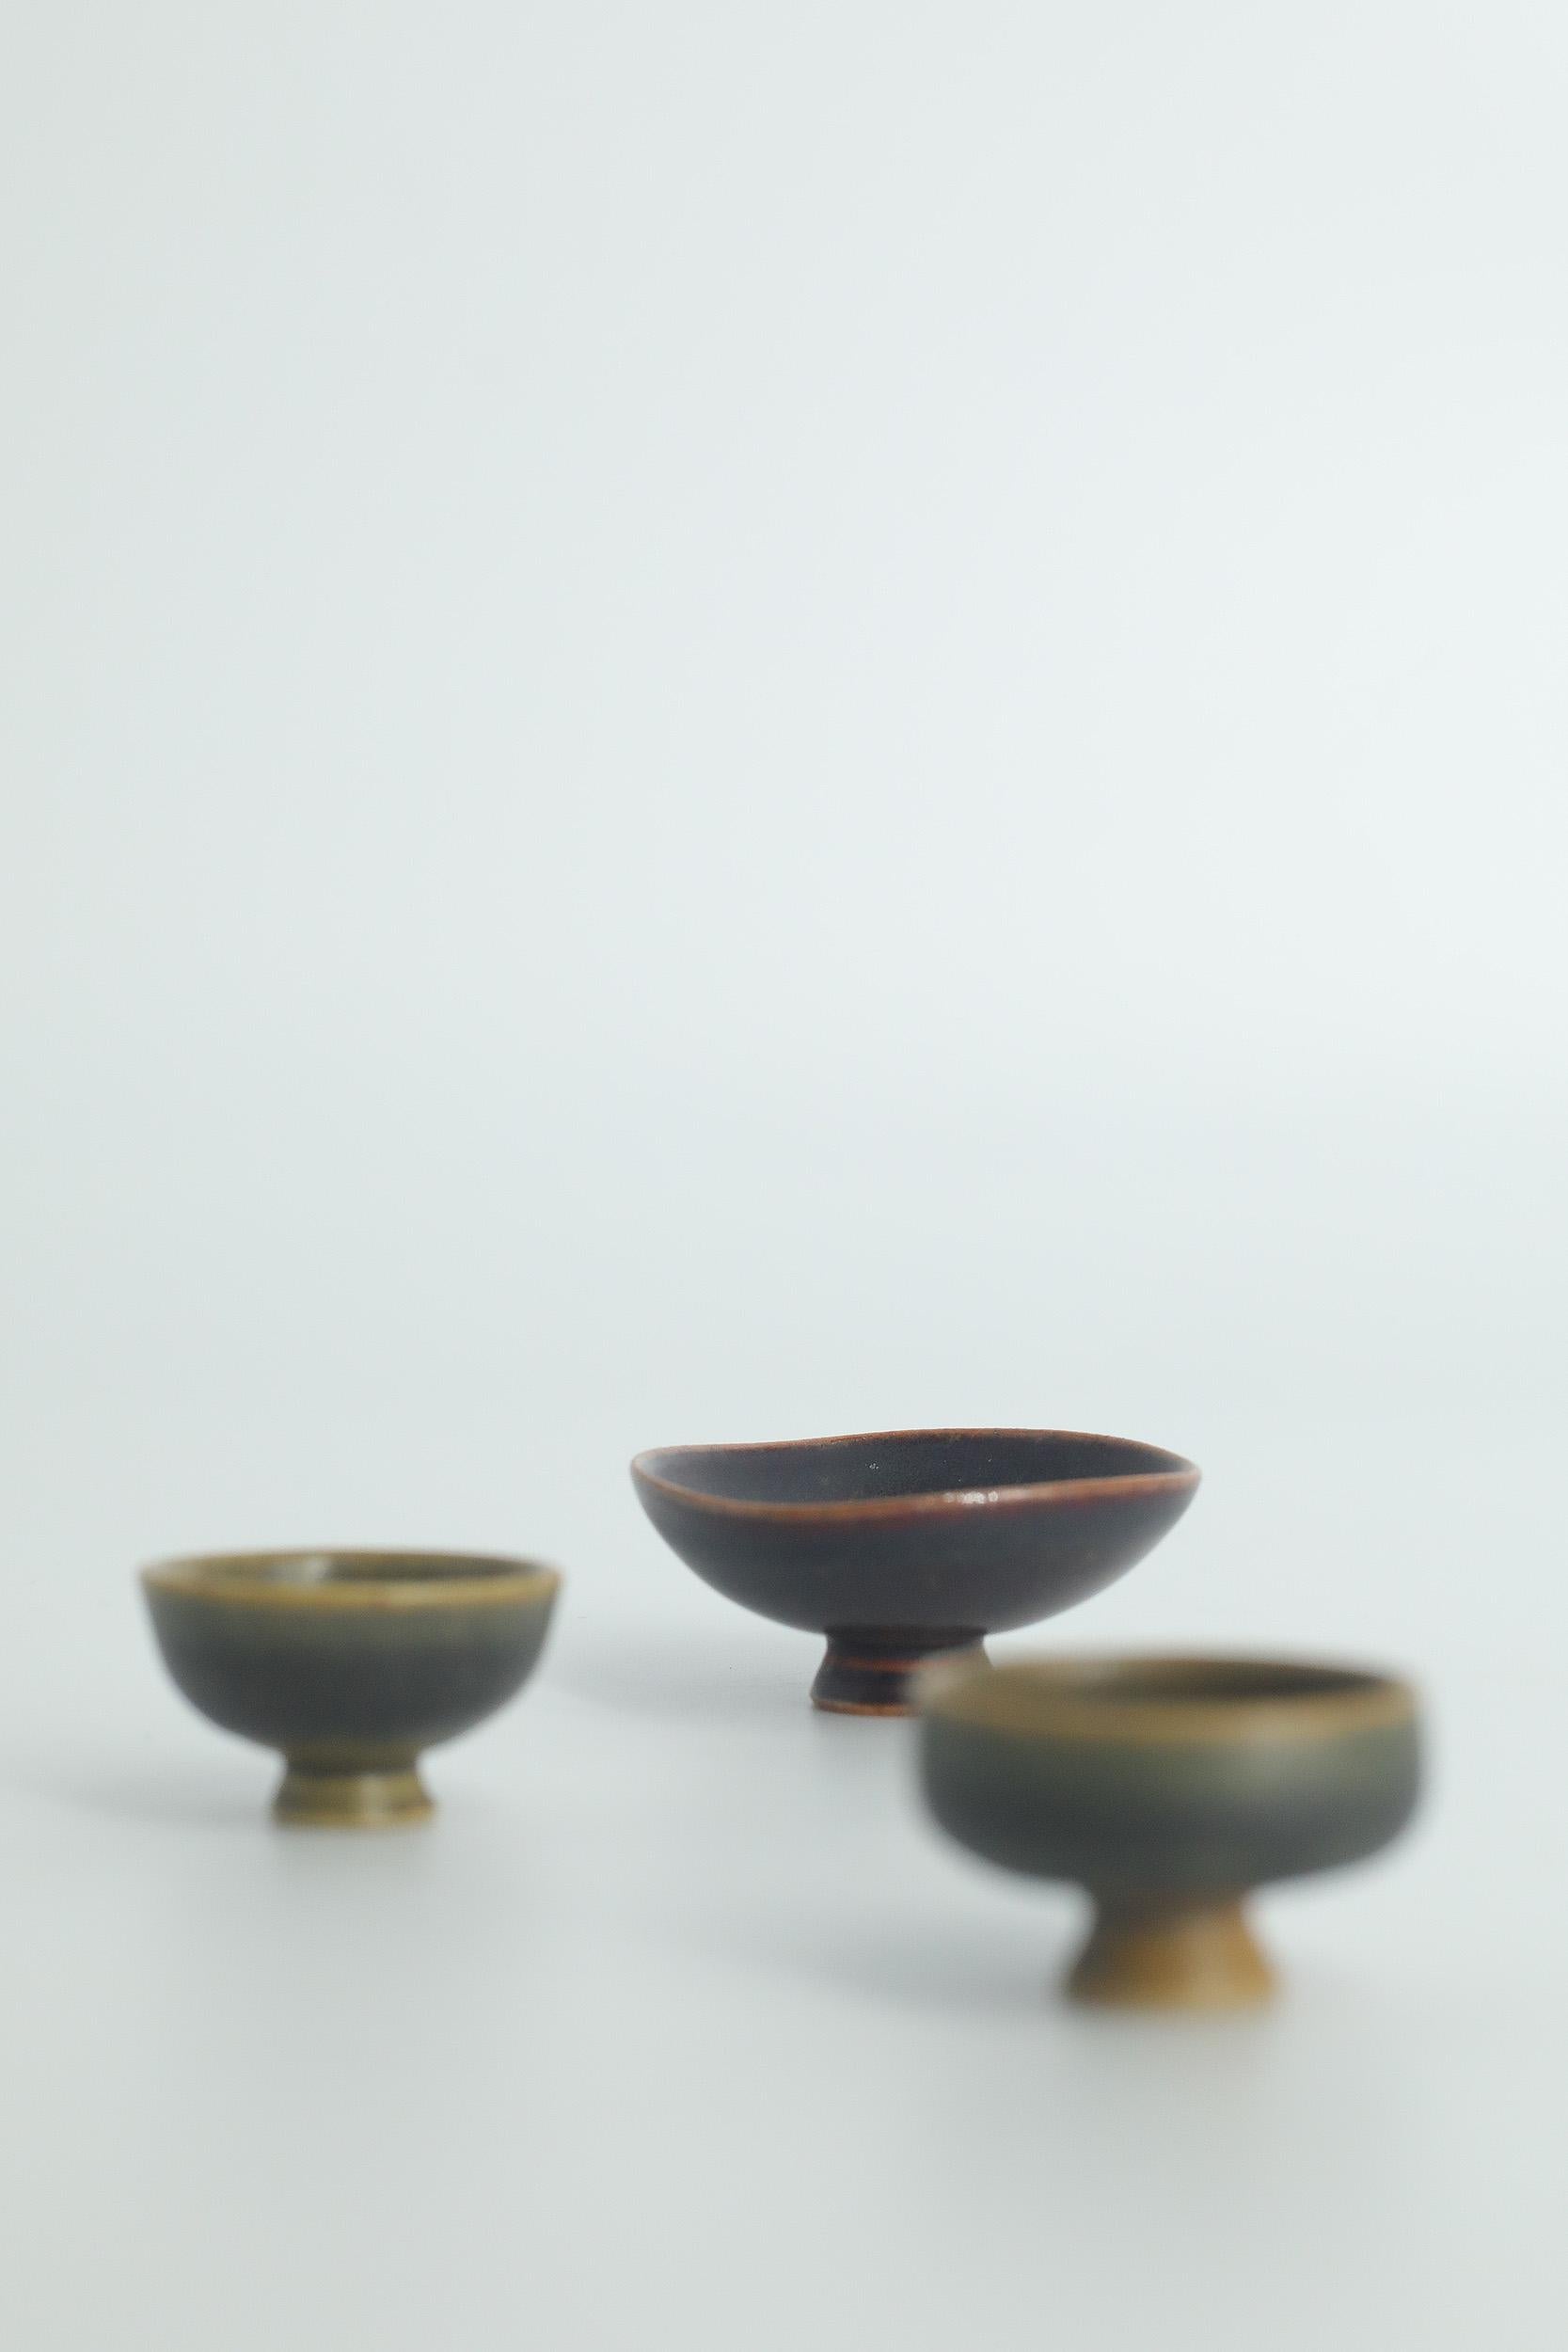 Height 2 cm  Width 4 cm  Depth 4 cm
Height 2 cm  Width 2.5 cm  Depth 2.5 cm
Height 2 cm  Width 2.5 cm  Depth 2.5 cm

This set of 3 miniature bowls was designed by John Andersson for the Swedish manufacture Höganäs Keramik during the 1950s. Handmade